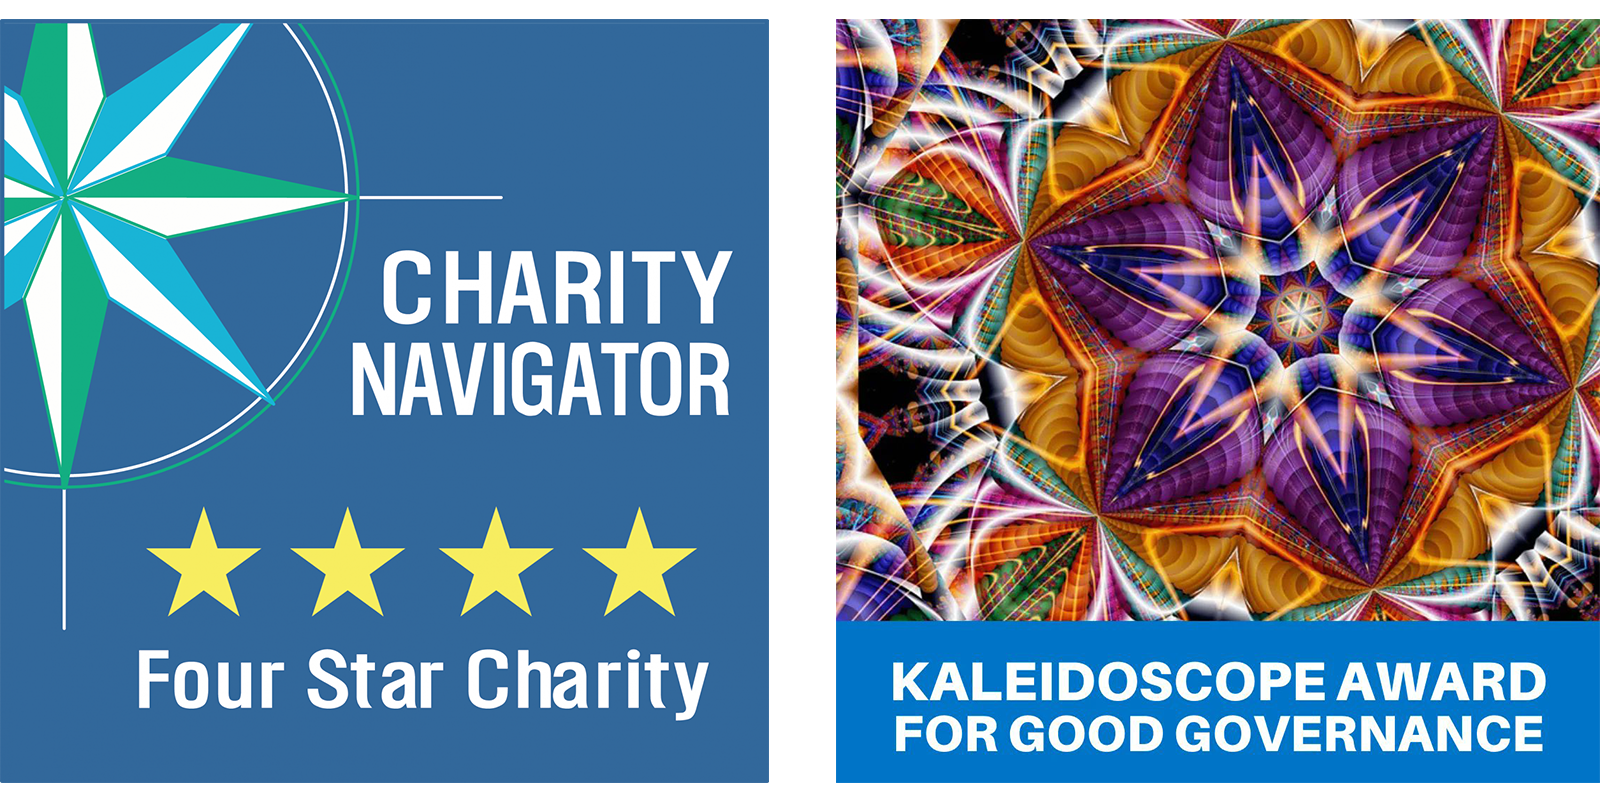 A kaleidoscope design above the text "Kaleidoscope Award For Good Governance" and the Four Star Charity Rating from Charity Navigator logo.